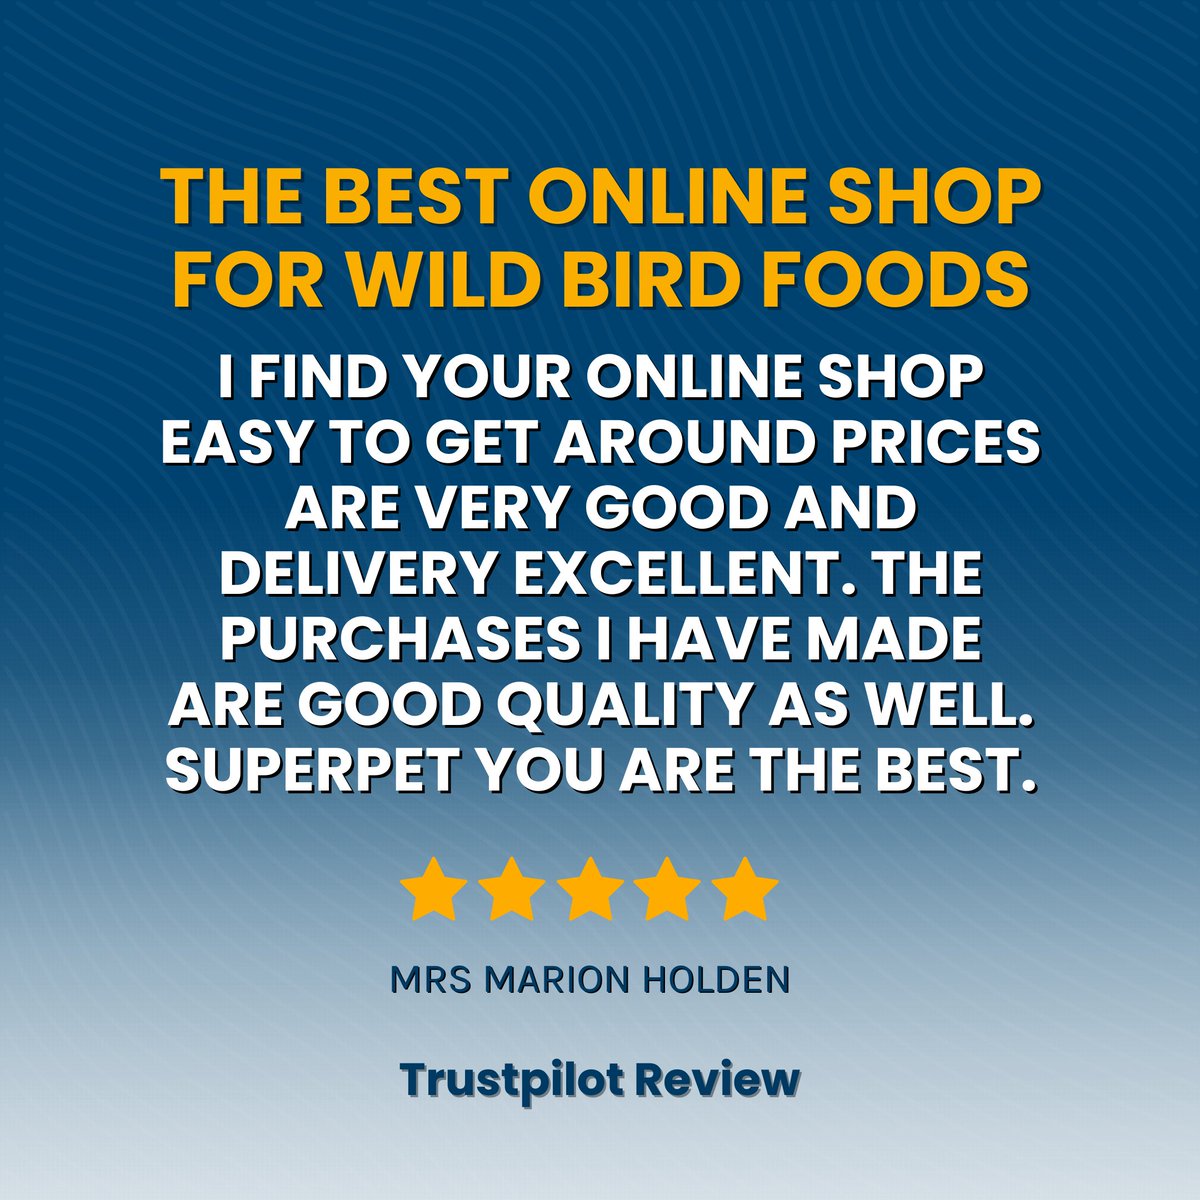 🌟 Mrs Marion Holden thinks we're the top spot for wild bird foods: 'Easy to navigate, great prices, excellent delivery!' 🐦 Thanks for making our day! Fly over to 👉 superpet.co.uk

#Superpet #WildBirdCare #PetSupplies #HappyCustomers #Trustpilot